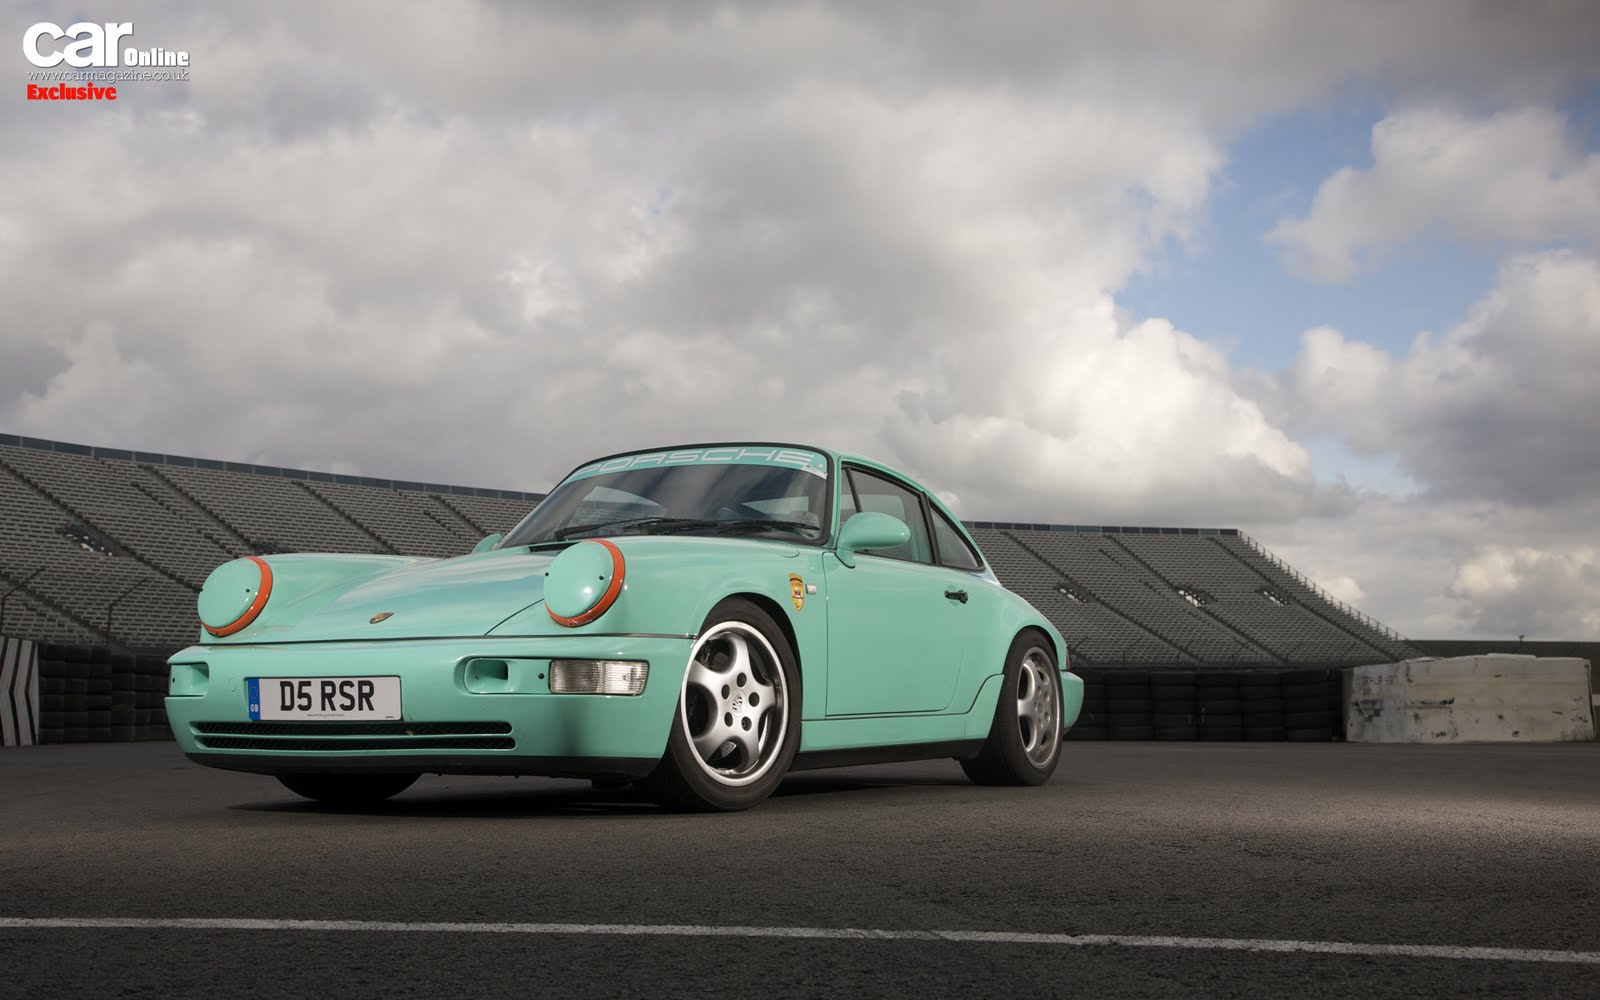 Refast wallpaper: Wallpapers of Porsche 964 – Mitra Images :: Image ...